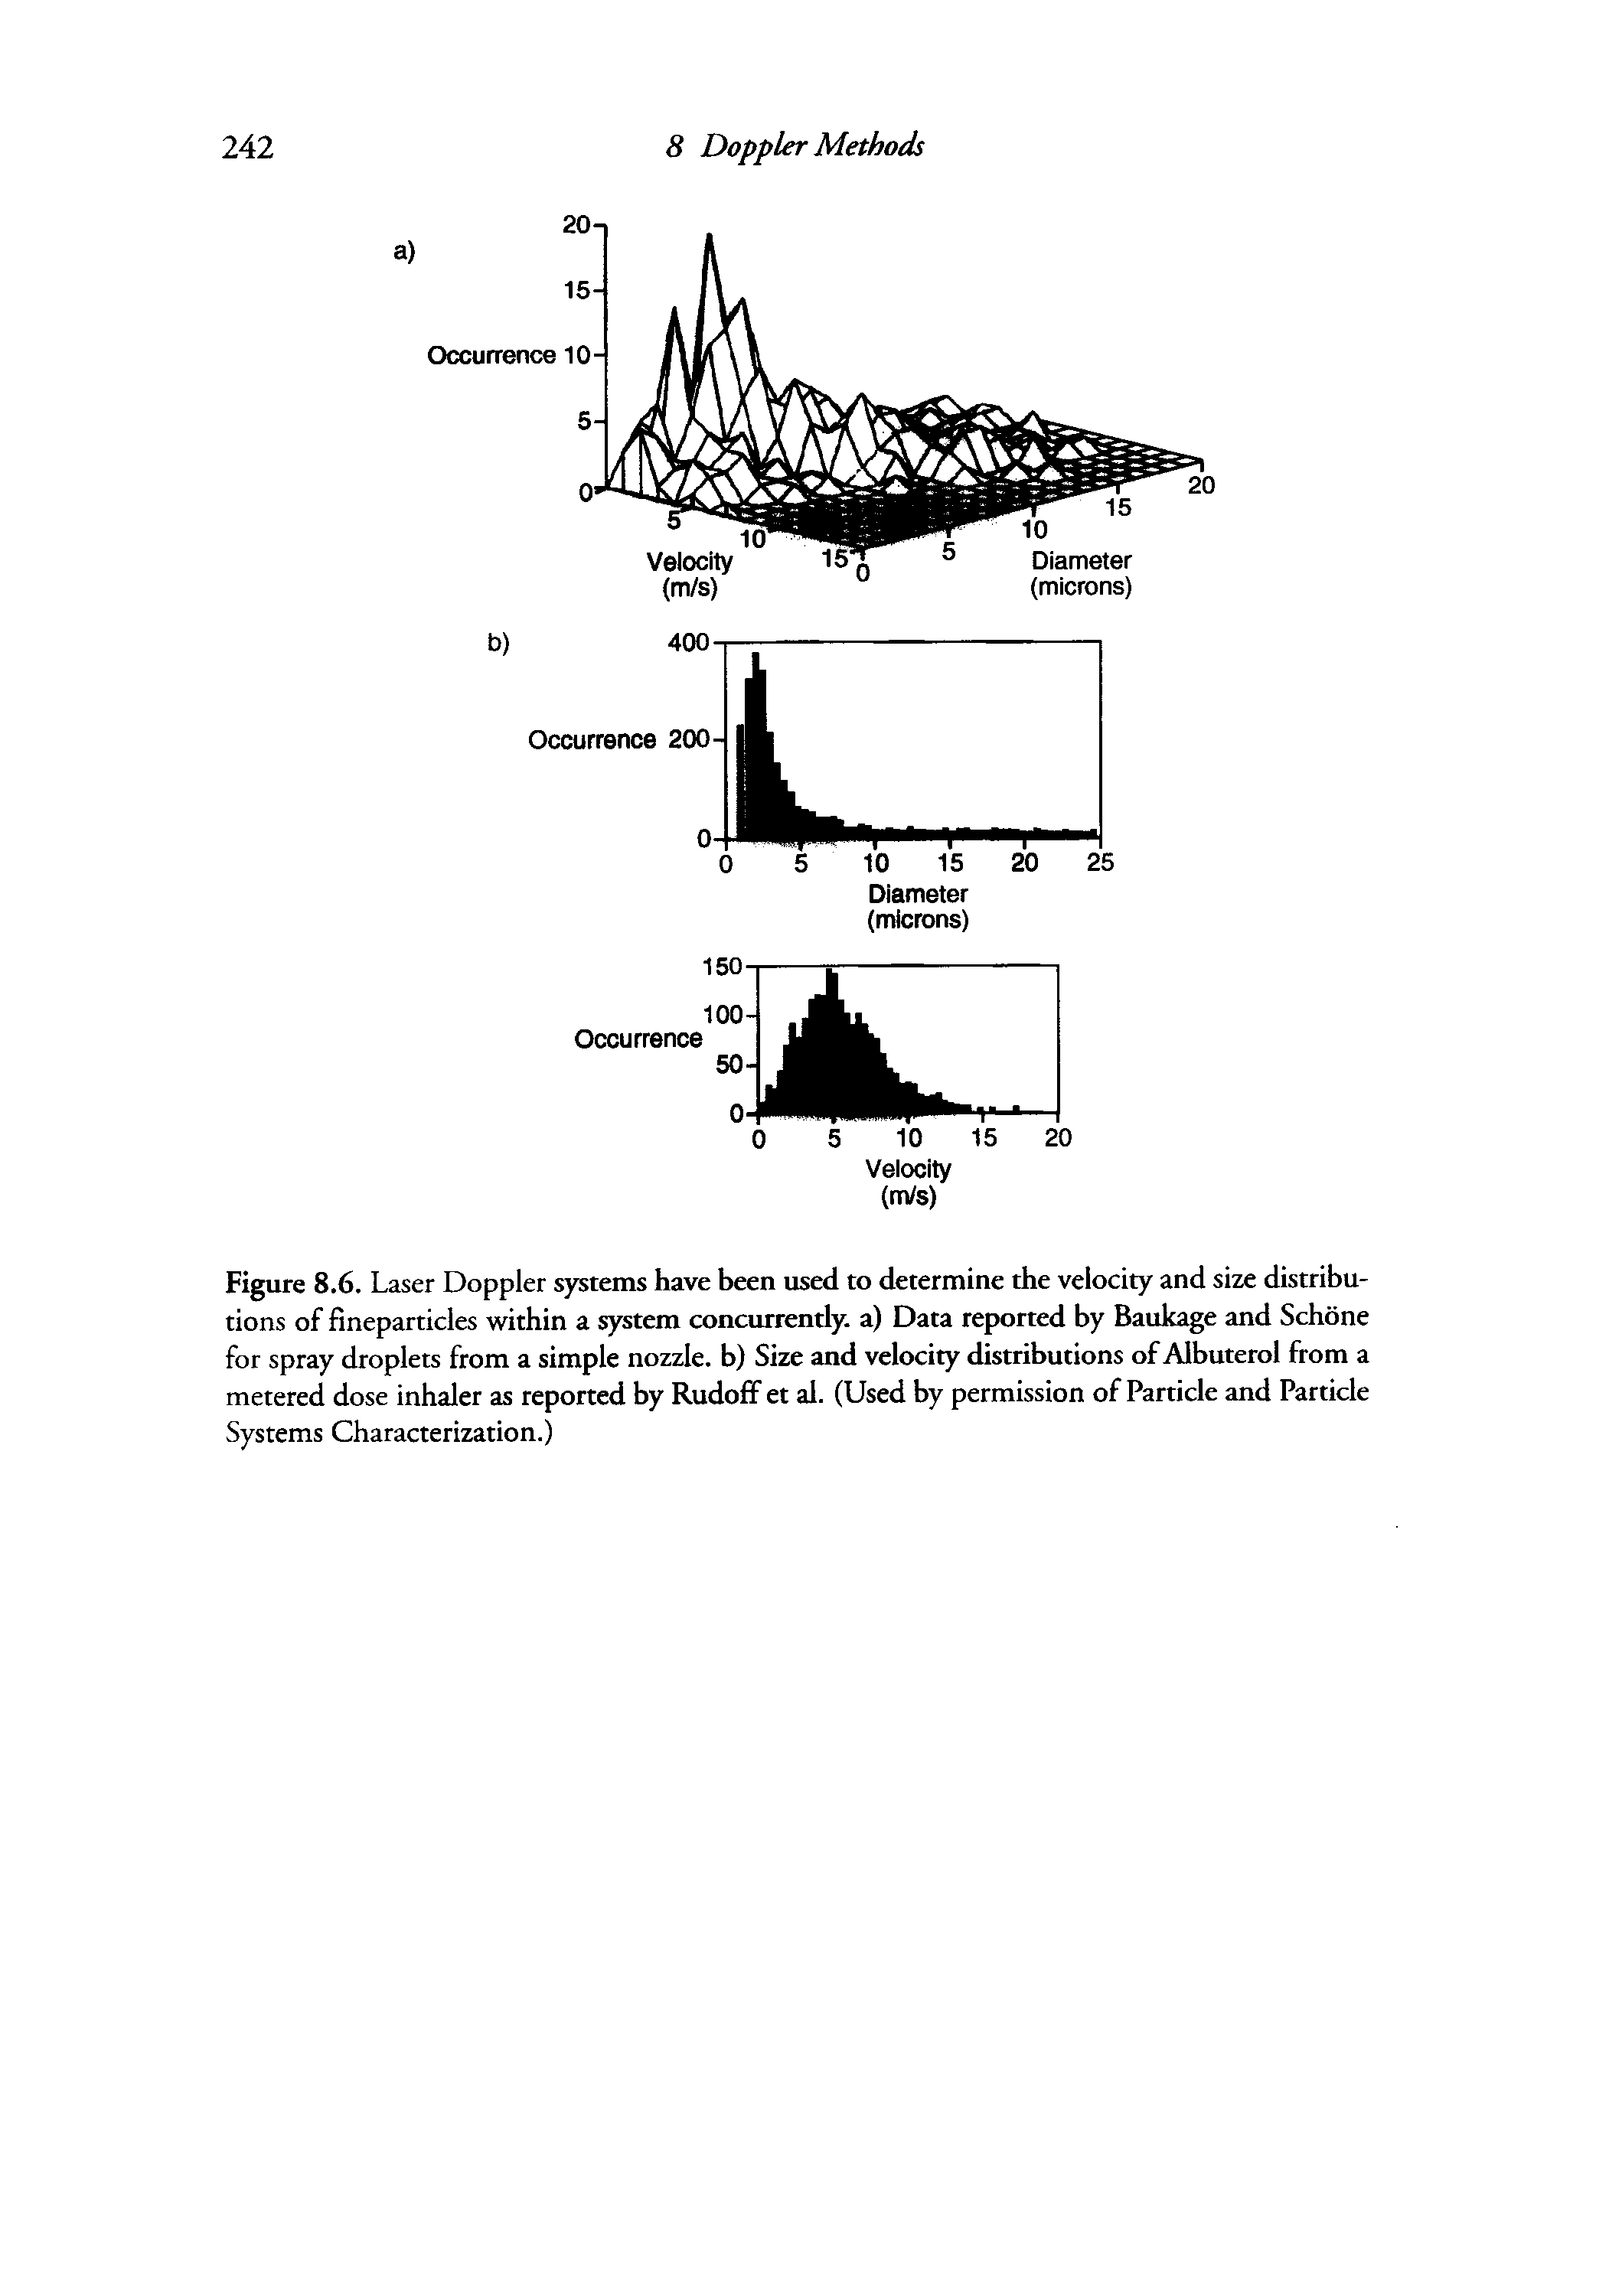 Figure 8.6. Laser Doppler systems have been used to determine the velocity and size distributions of fineparticles within a system concurrently, a) Data reported by Baukage and Schone for spray droplets from a simple nozzle, b) Size and velocity distributions of Albuterol from a metered dose inhaler as reported by Rudoff et al. (Used by permission of Particle and Particle Systems Characterization.)...